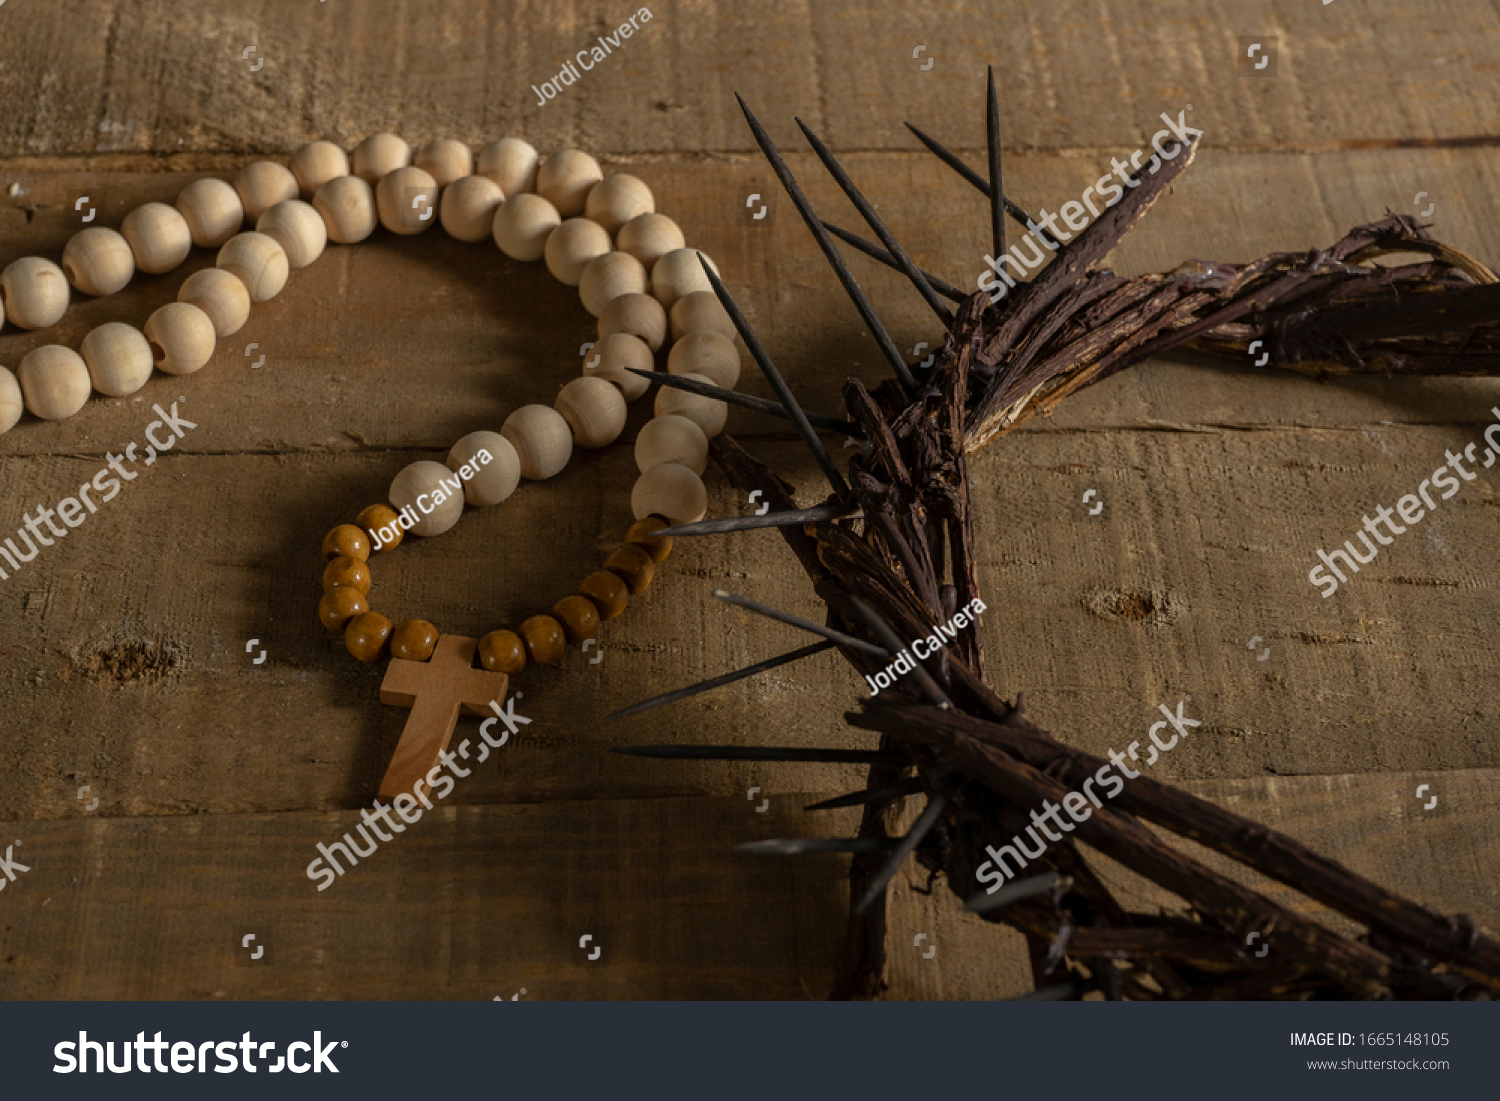 Concept of passion, crucifixion and resurrection. Iconic symbols related to Palm Sunday and Easter rest on a wooden table, crown of thorns and a rosary. #1665148105